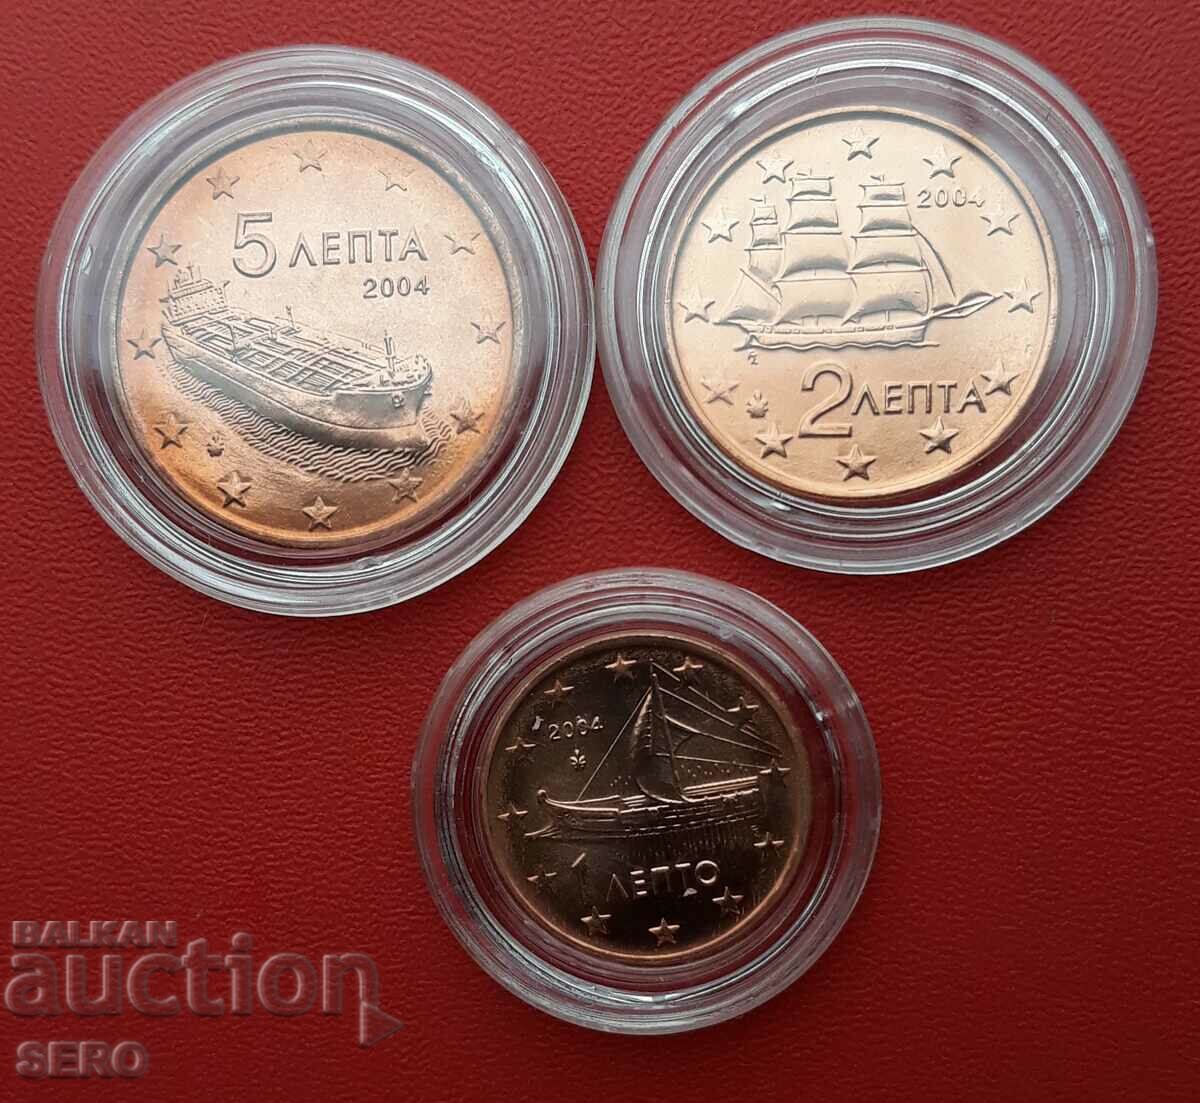 Greece-lot 3 euro coins 2004 in capsules